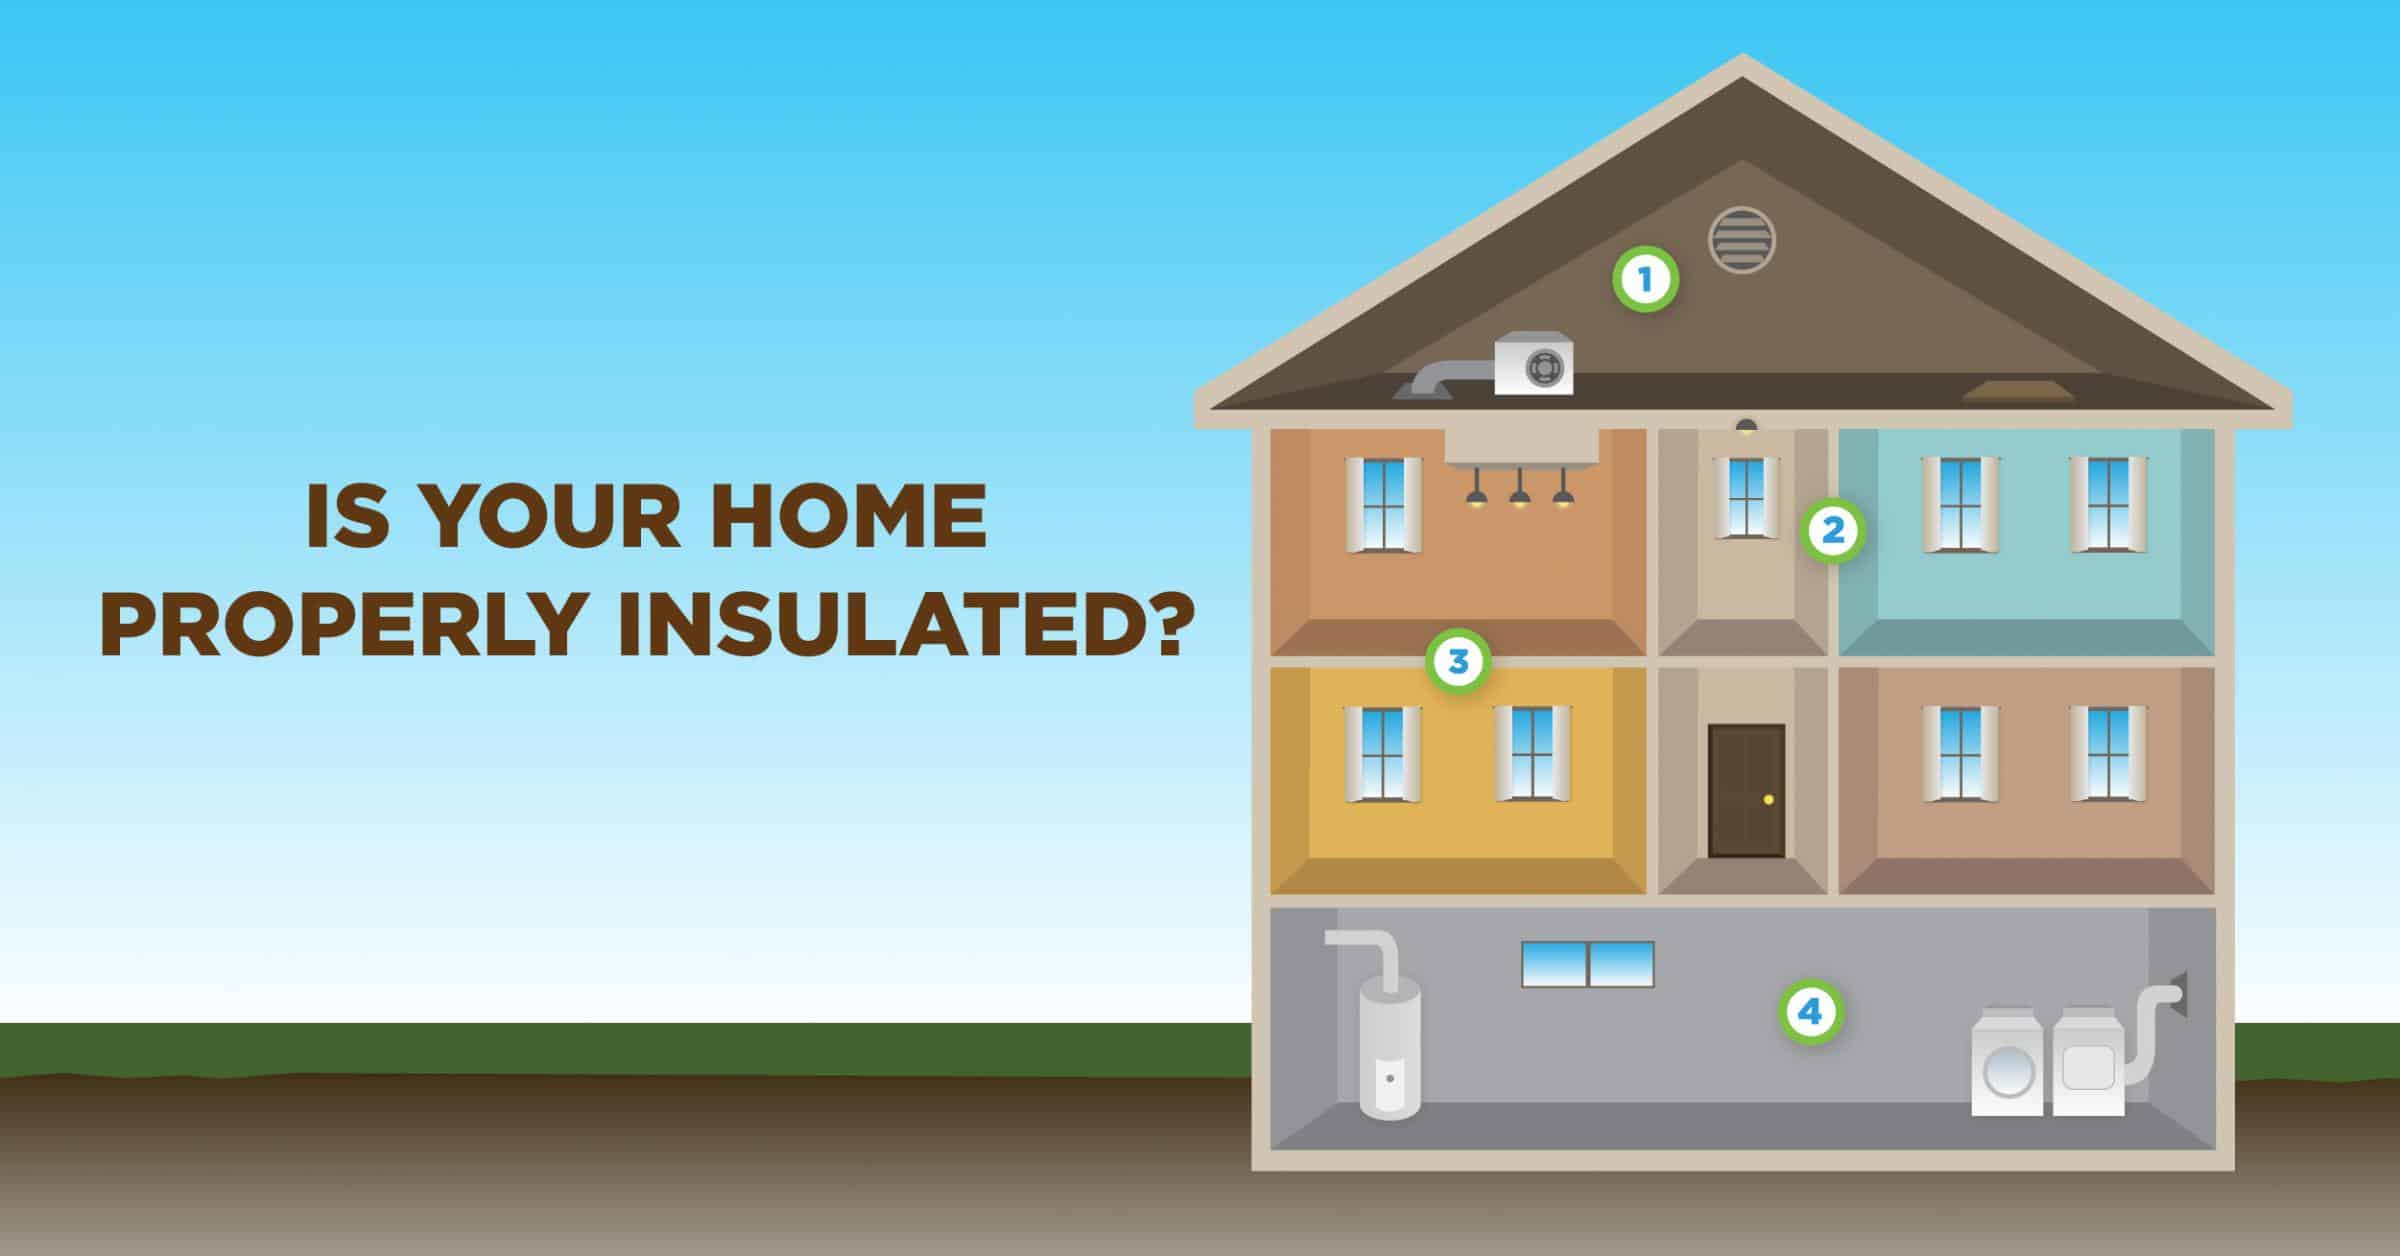 Is Your Home Properly Insulated image